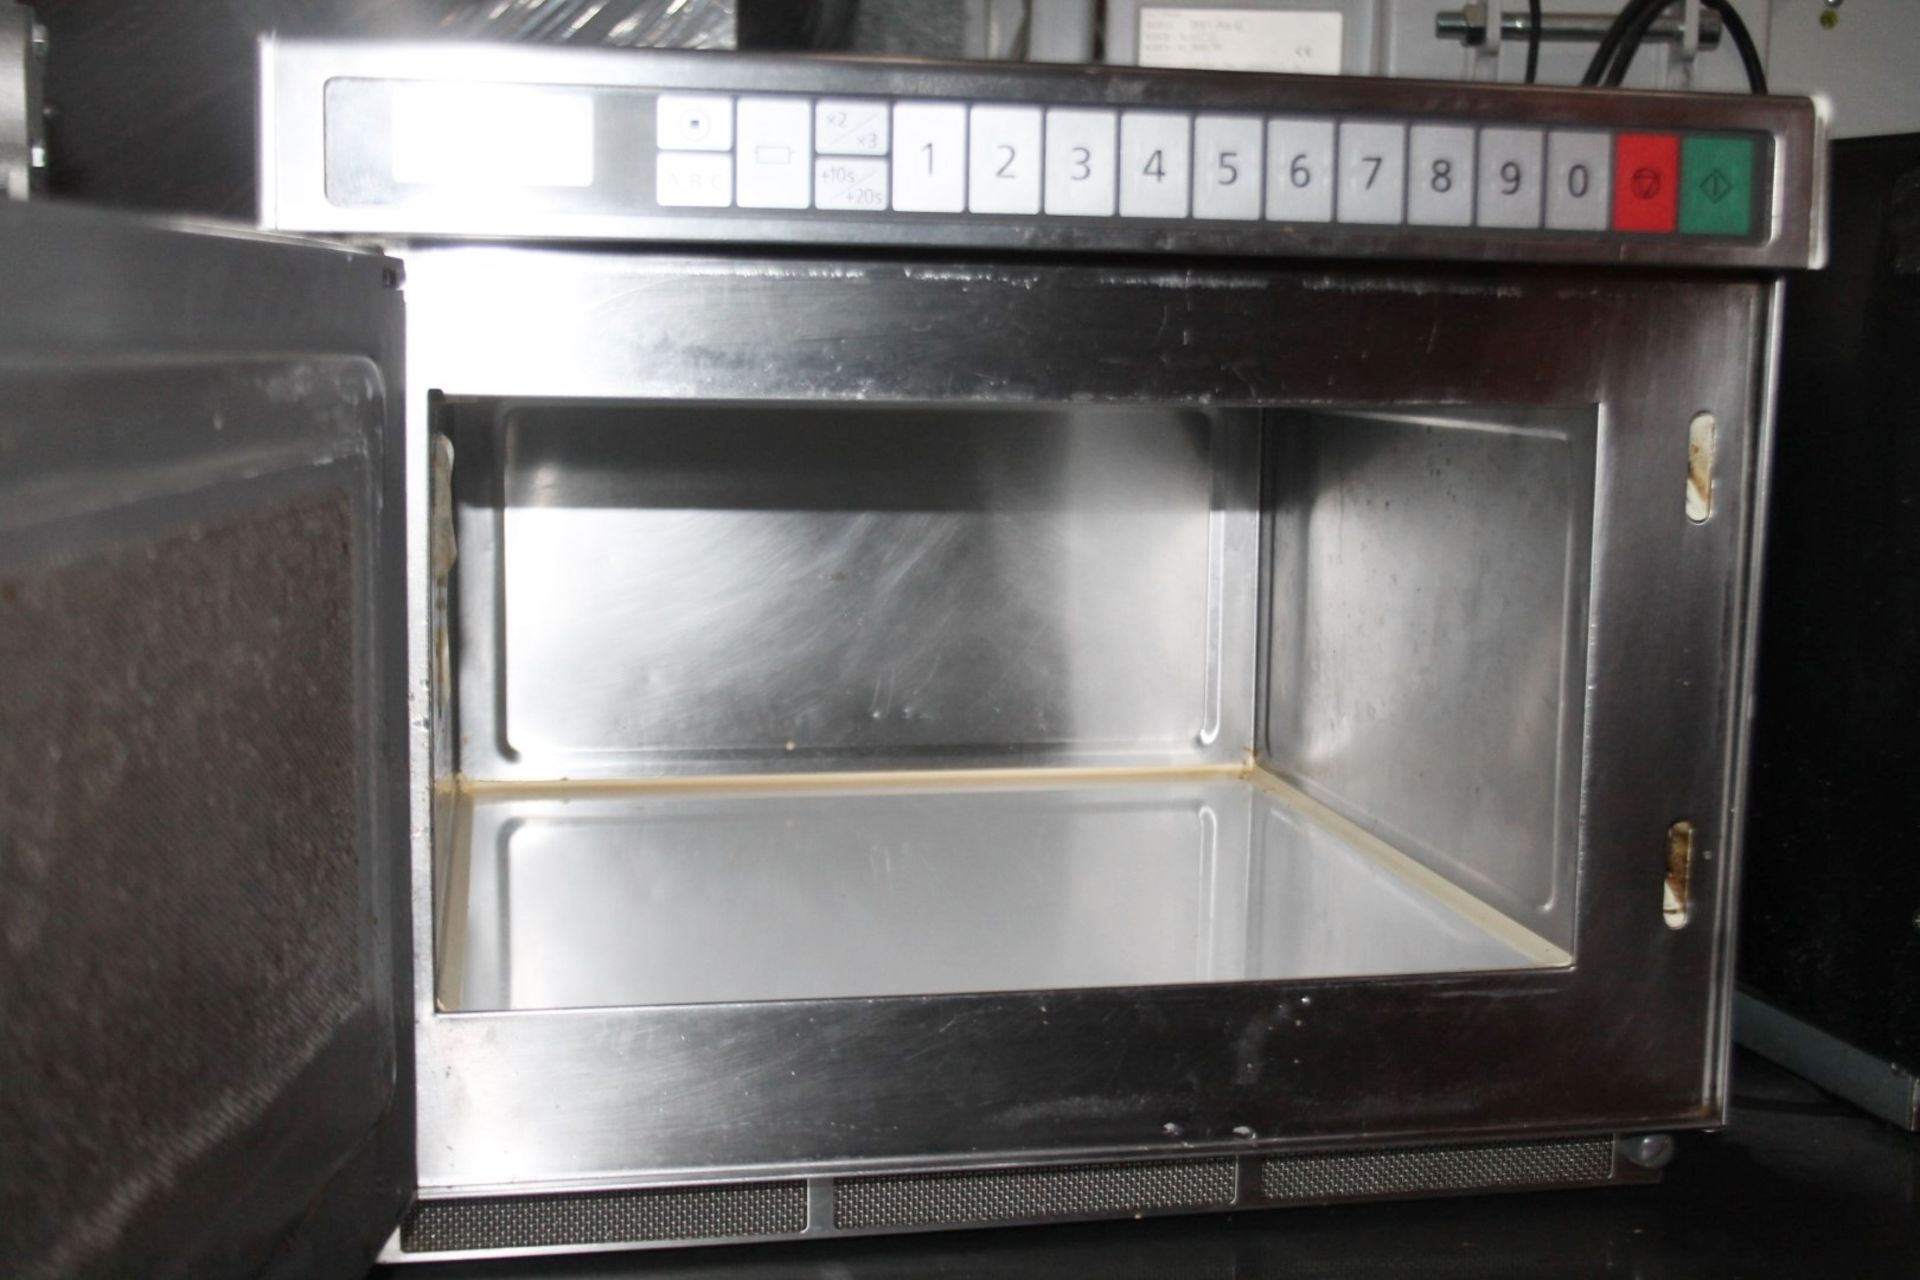 1 x Panasonic Commercial Microwave Oven Featuring A Stainless Steel Exterior And 'Microsave' - Image 7 of 7